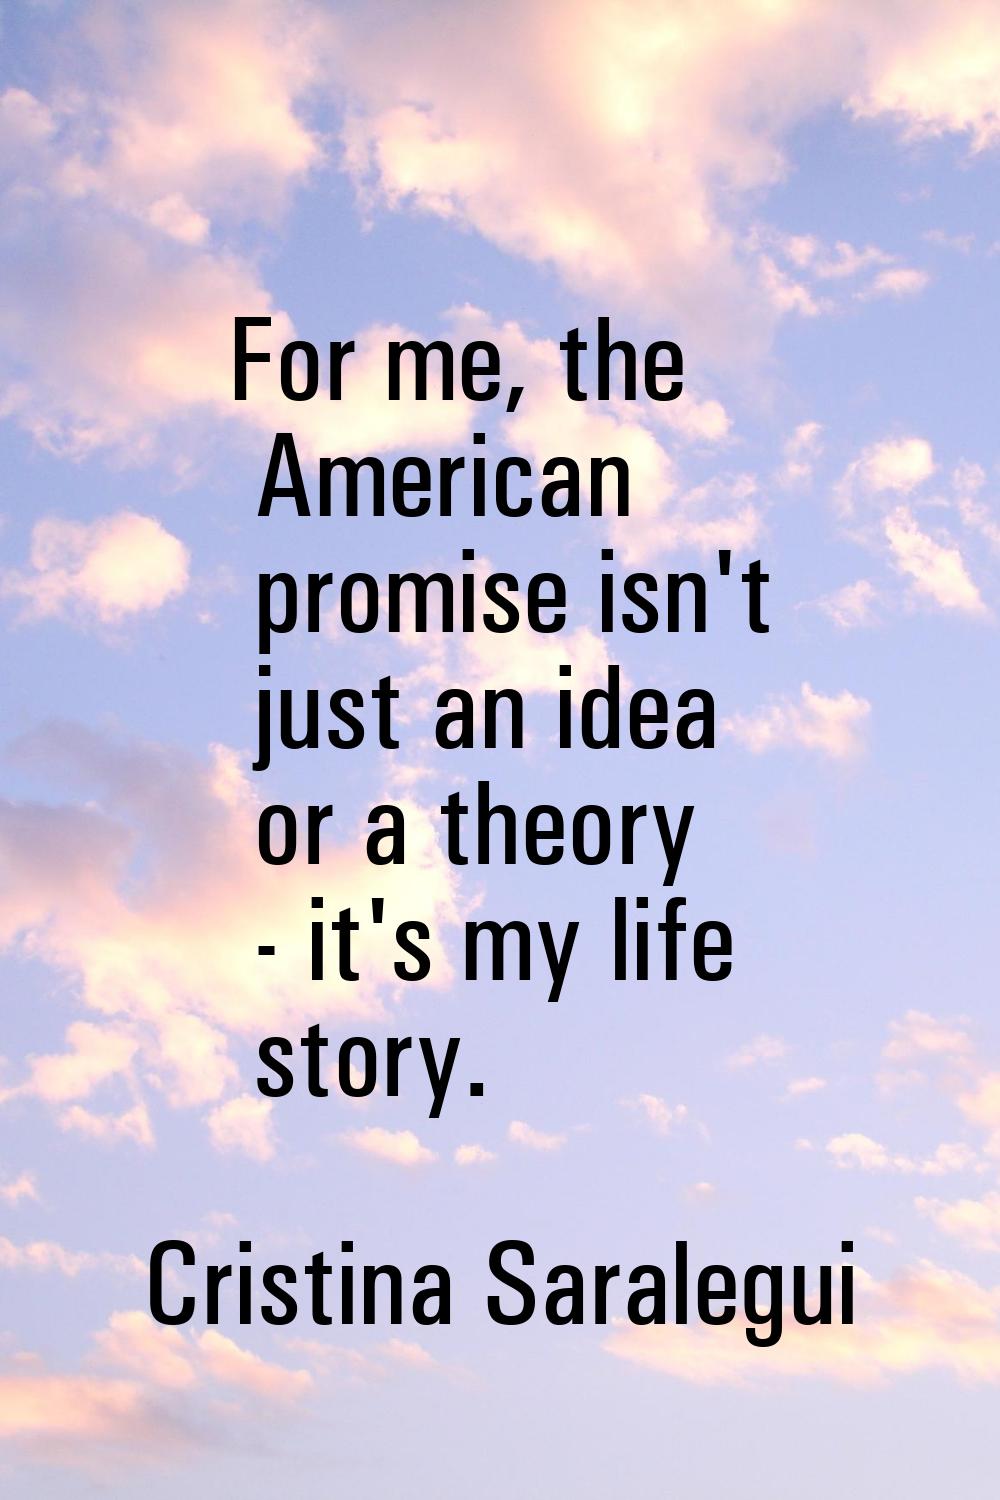 For me, the American promise isn't just an idea or a theory - it's my life story.